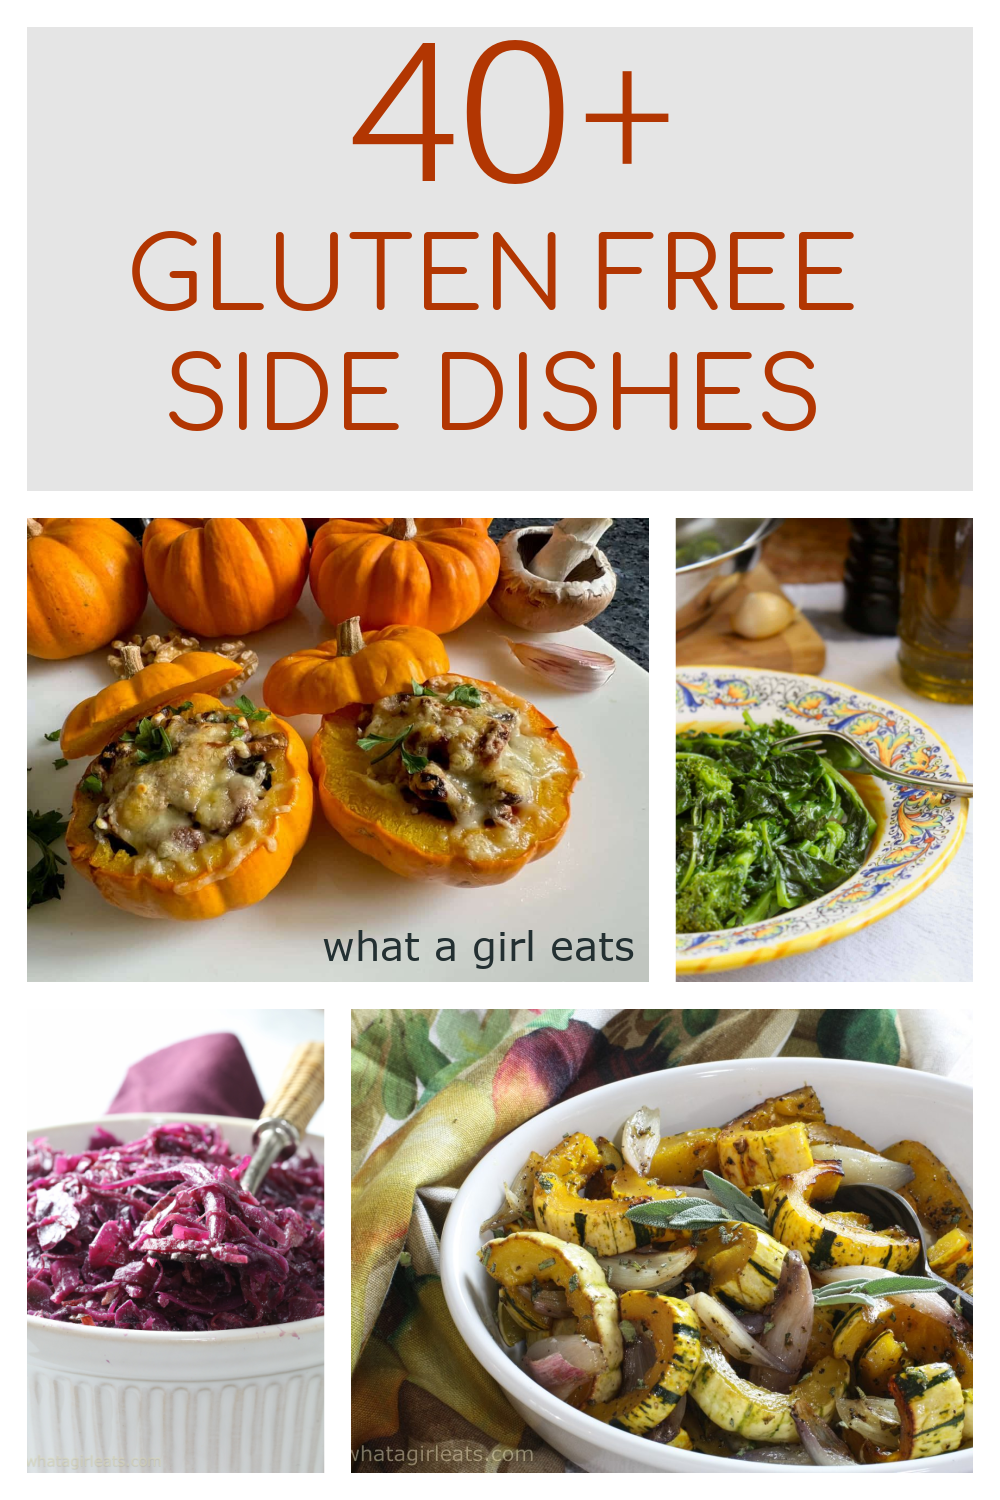 A collection of 40+ gluten free side dishes, salads, appetizers and desserts perfect for holiday entertaining.